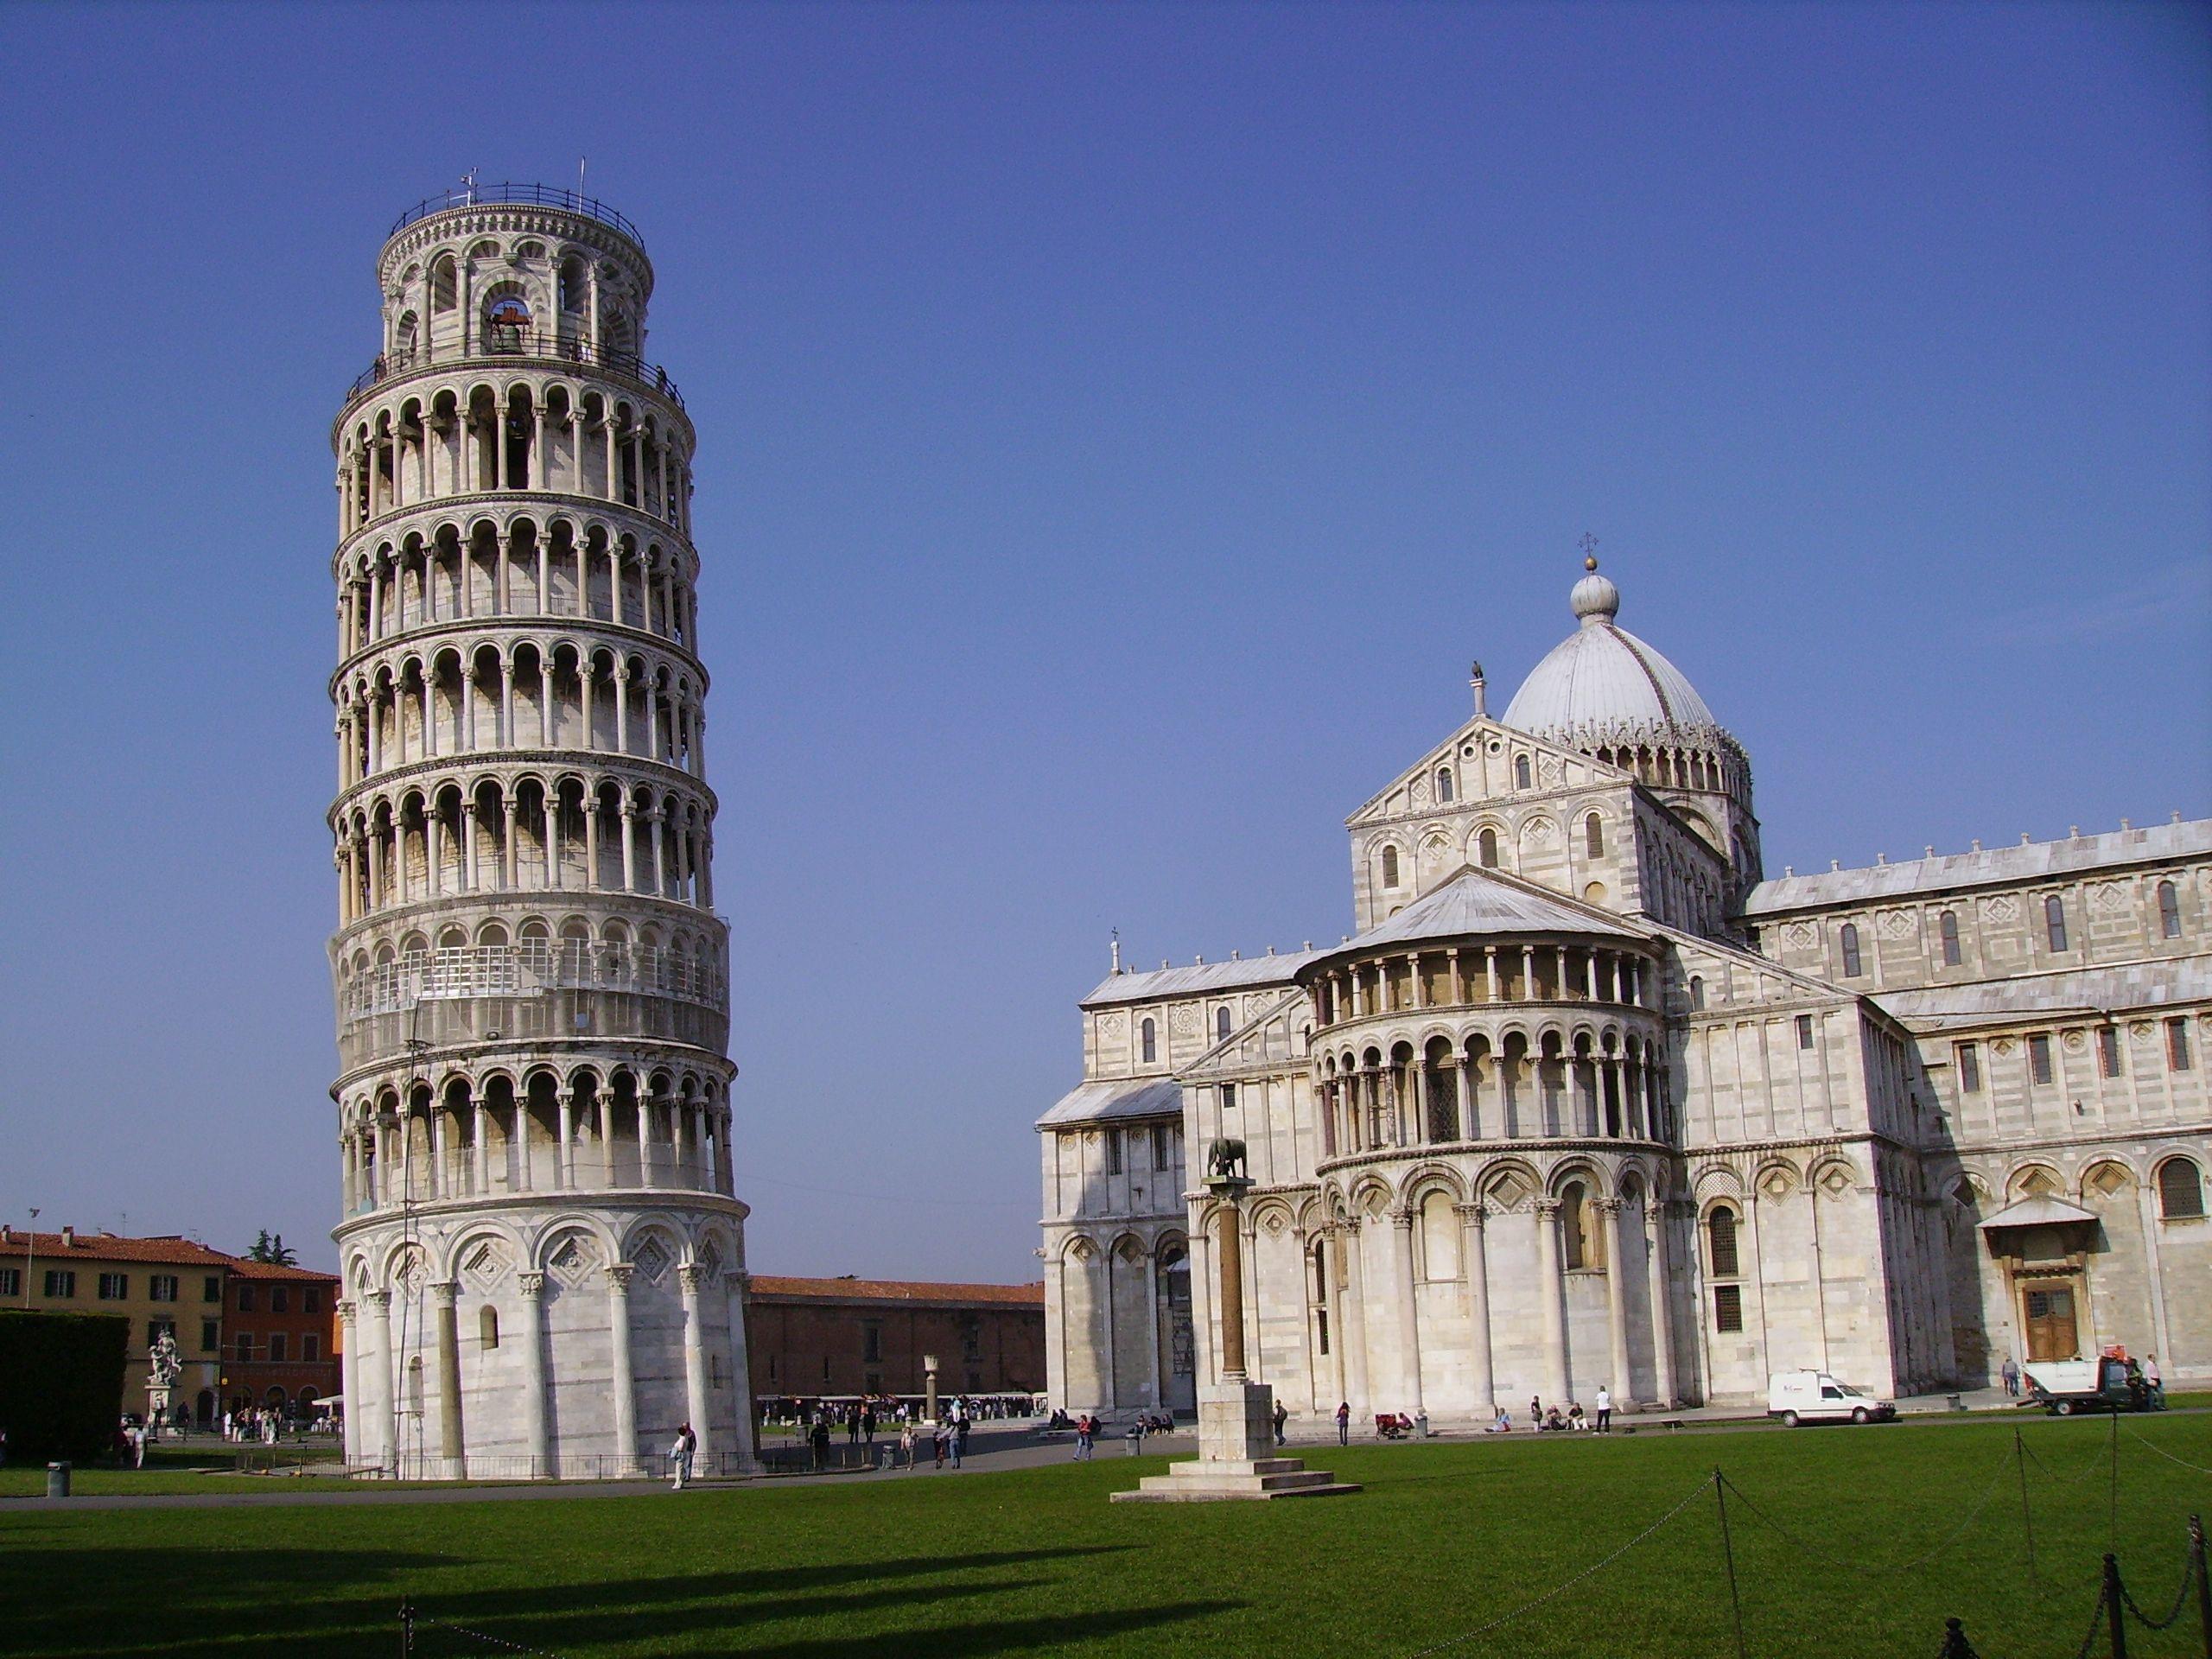 Leaning Tower of Pisa, Italy wallpaper and image